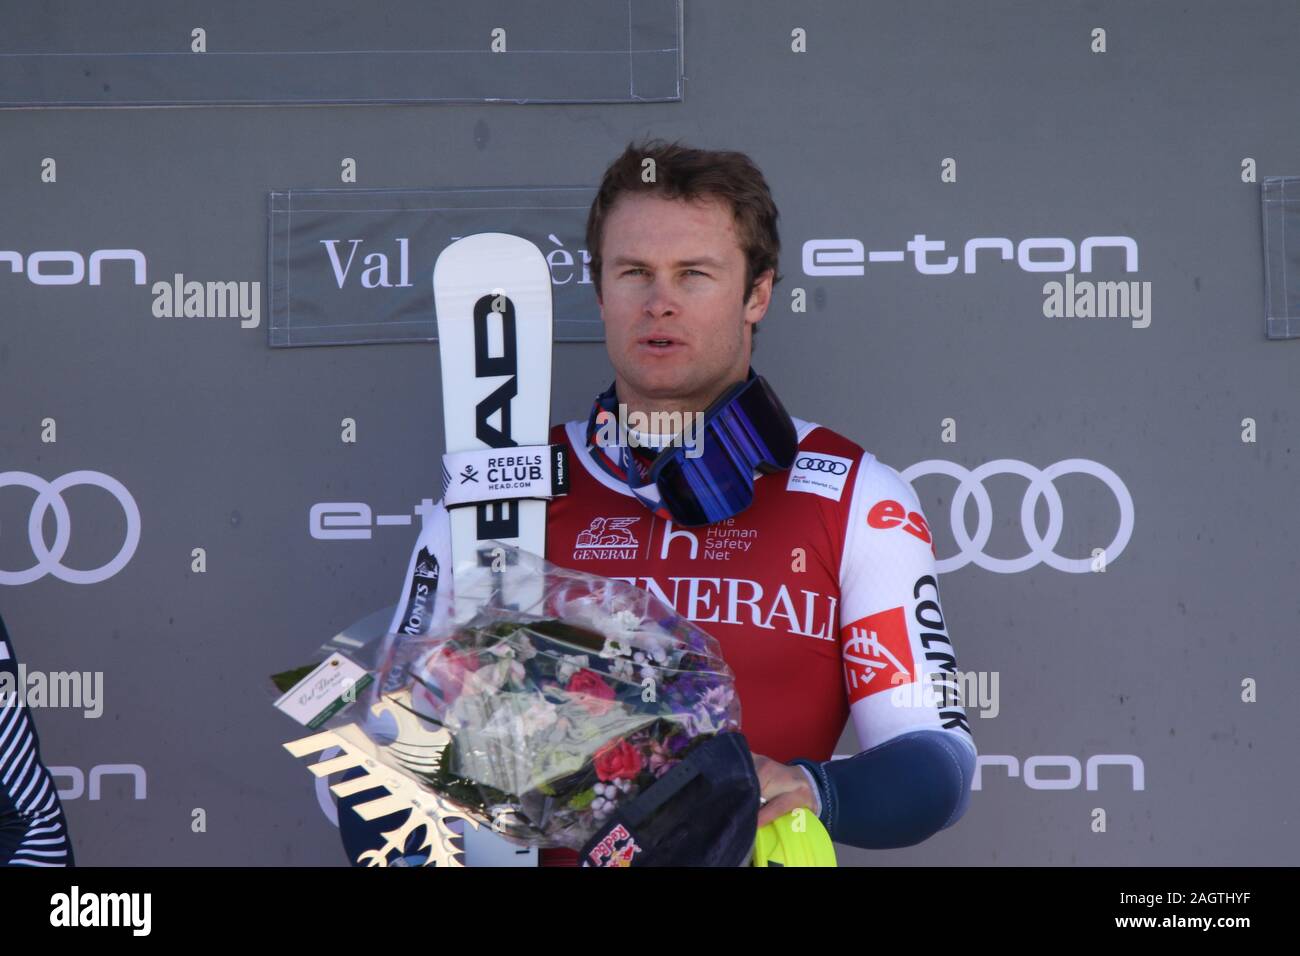 Alexis Pinturault alpine skier of Courchevel France on the podium in Val d'Isere Audi FIS Ski World Cup 2019 Stock Photo